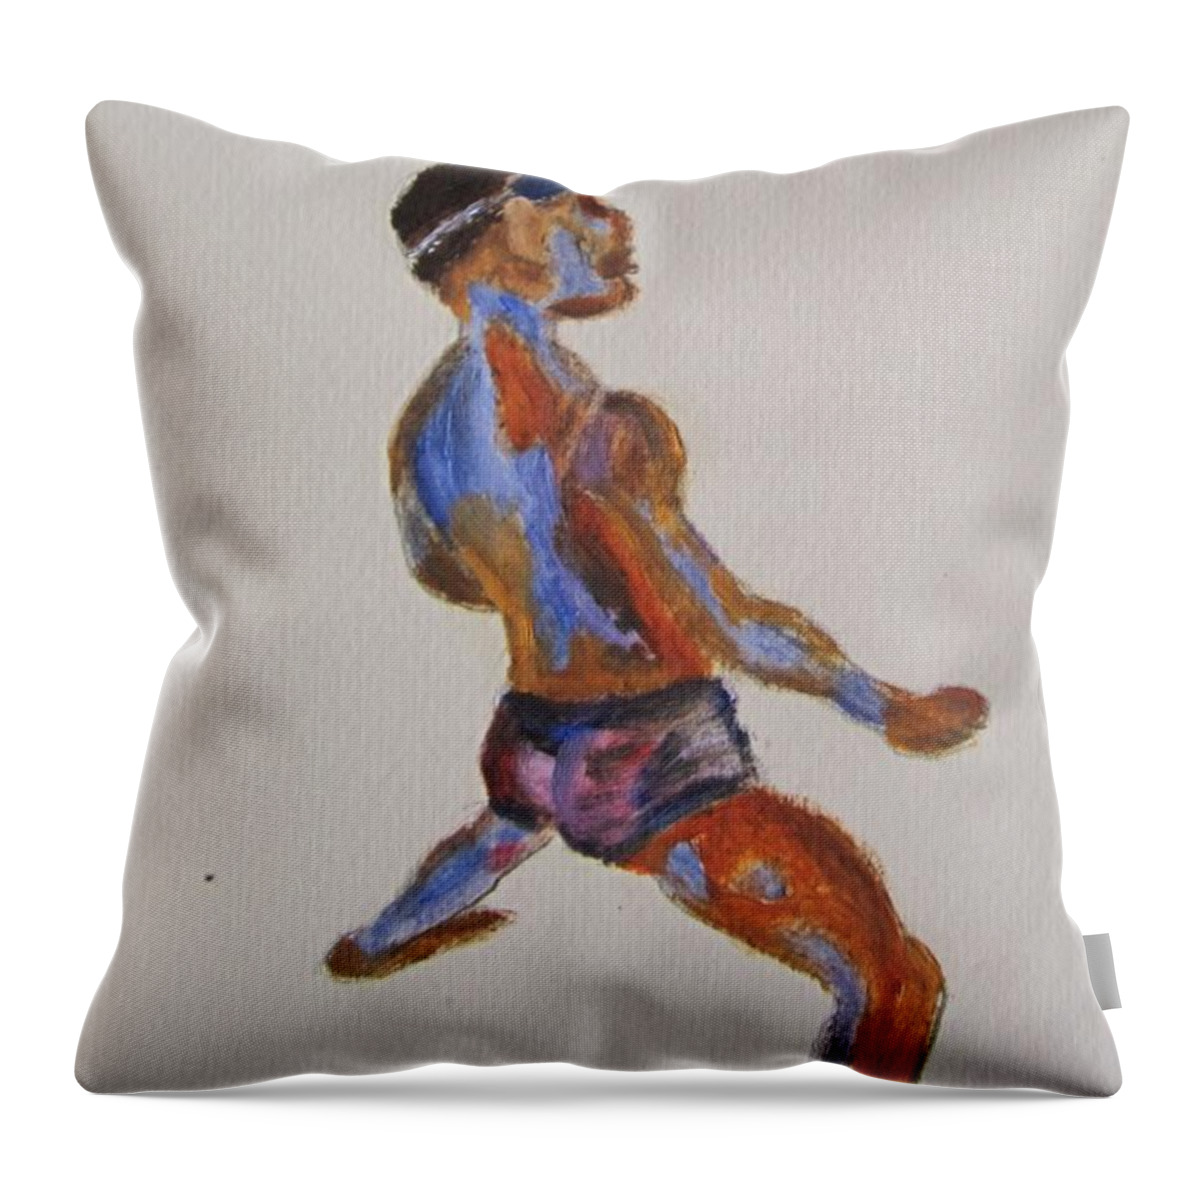 Jab Jab Throw Pillow featuring the painting Jab Jab by Jennylynd James